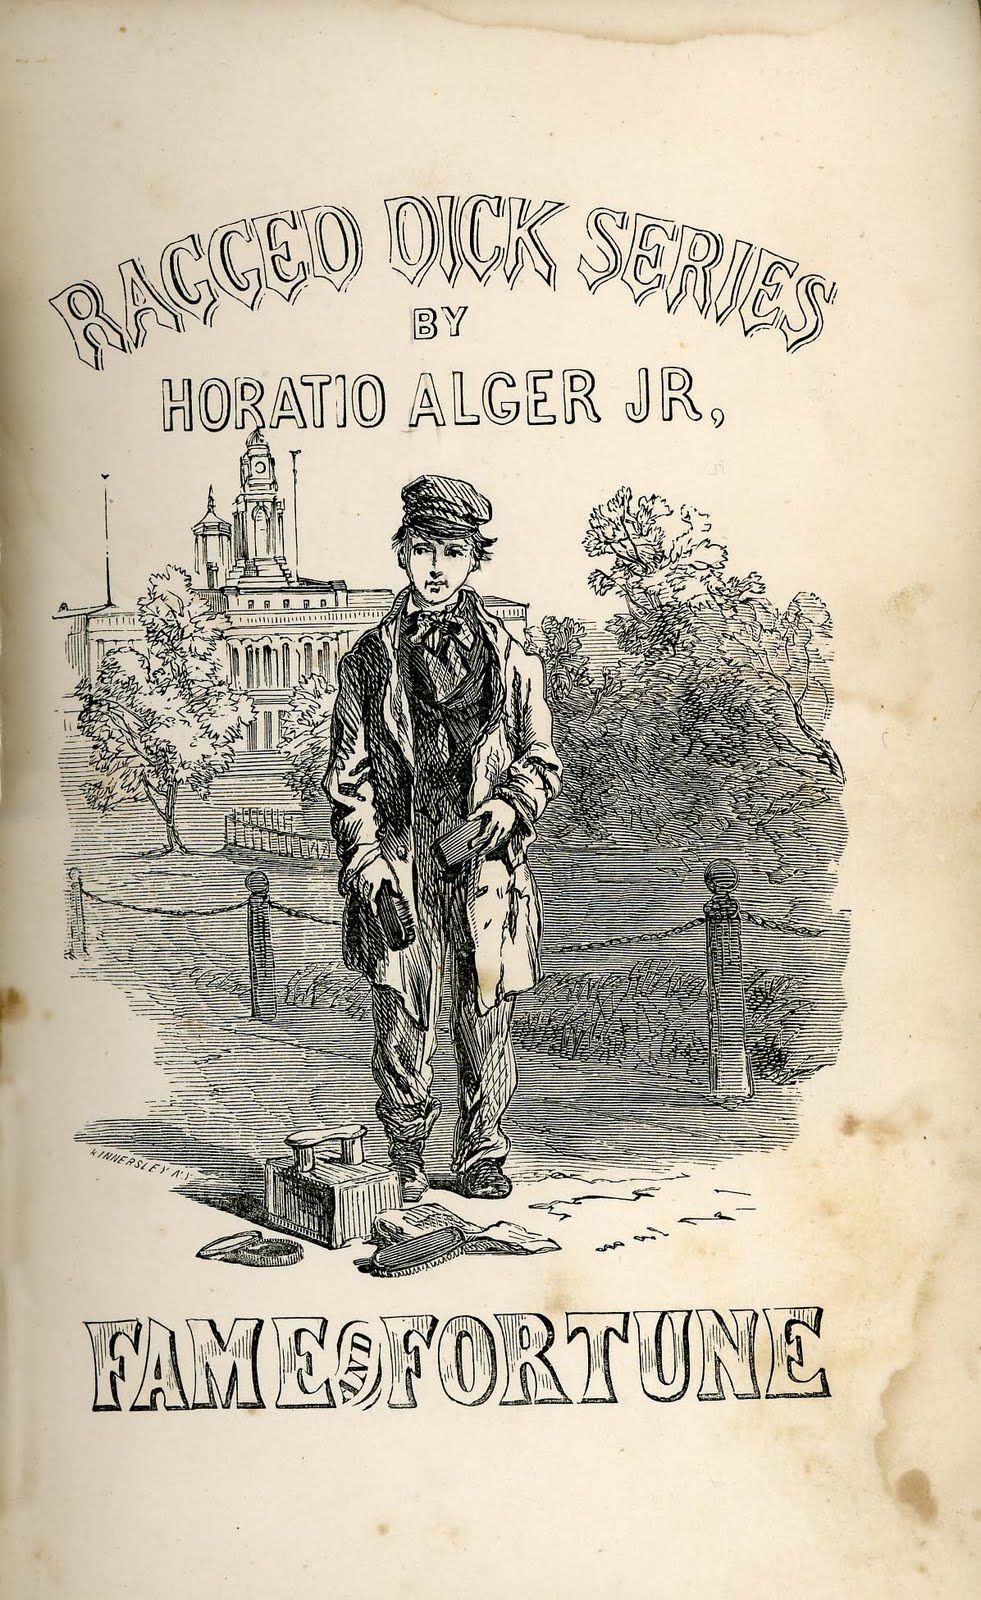 From Rags to Riches: Horatio Alger, Jr. and the American Dream.